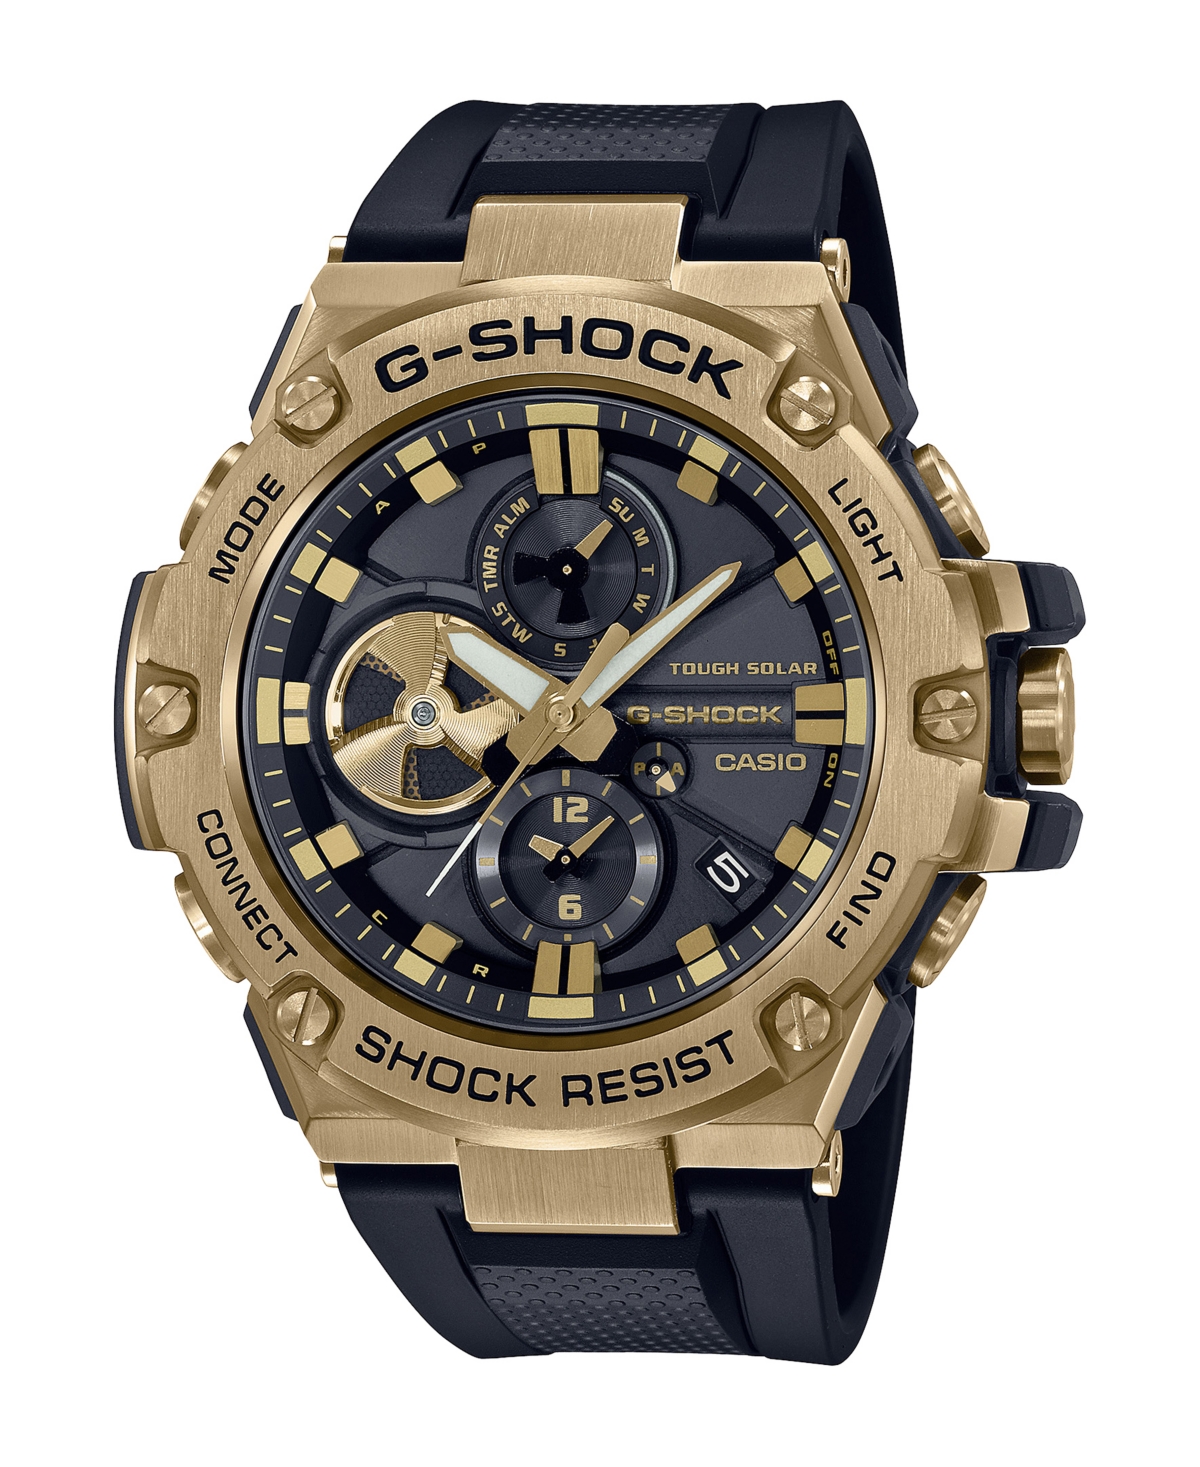 G-SHOCK G-SHOCK MEN'S GOLD-TONE AND BLACK RESIN STRAP WATCH 53.8MM GSTB100GB1A9